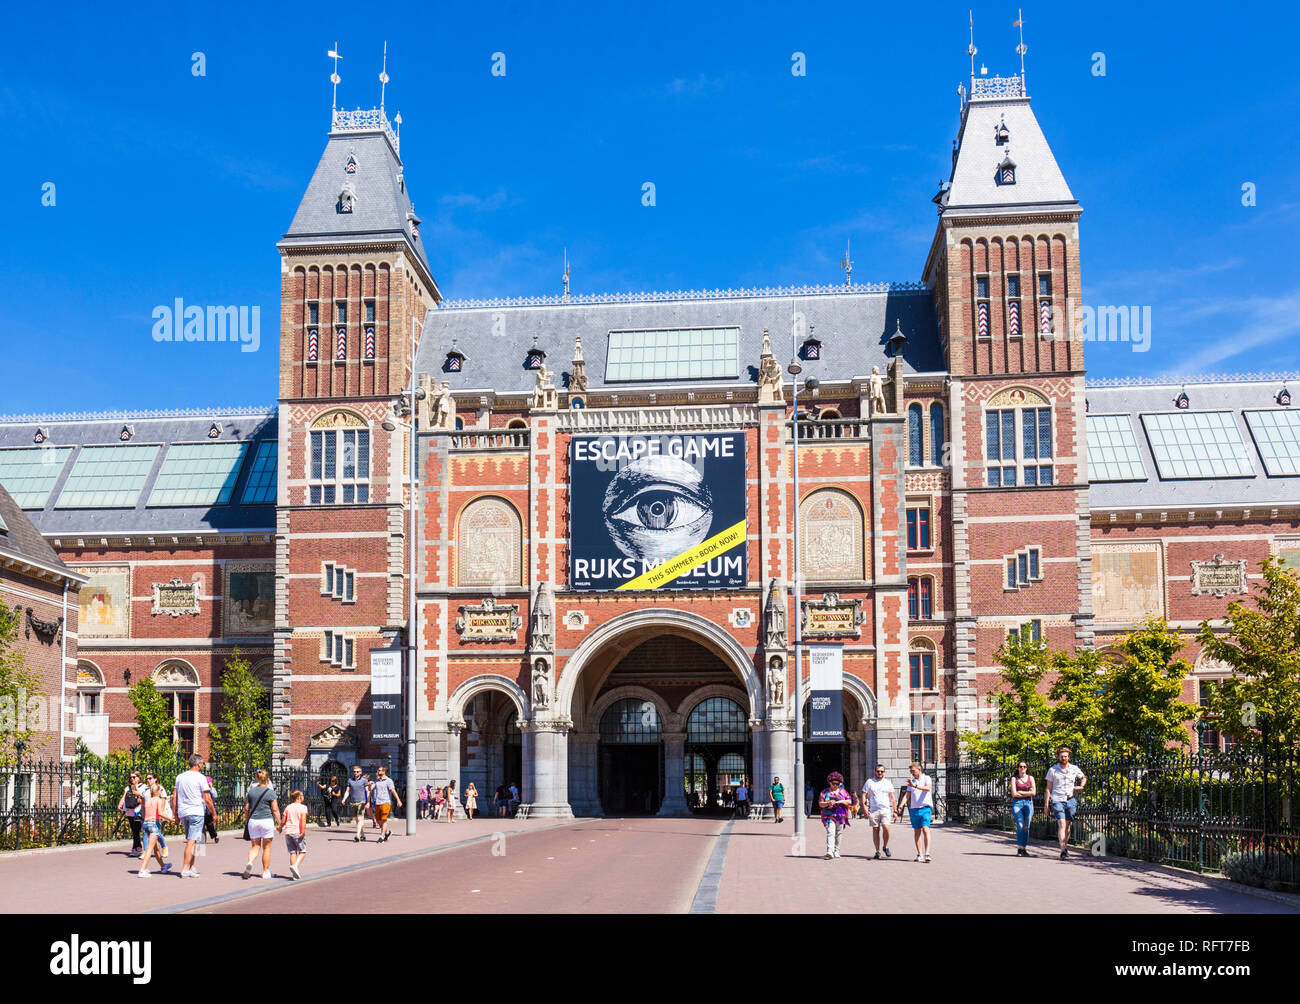 Entrance arch to the Rijksmuseum, Dutch Art gallery and museum, Amsterdam, North Holland, Netherlands, Europe Stock Photo